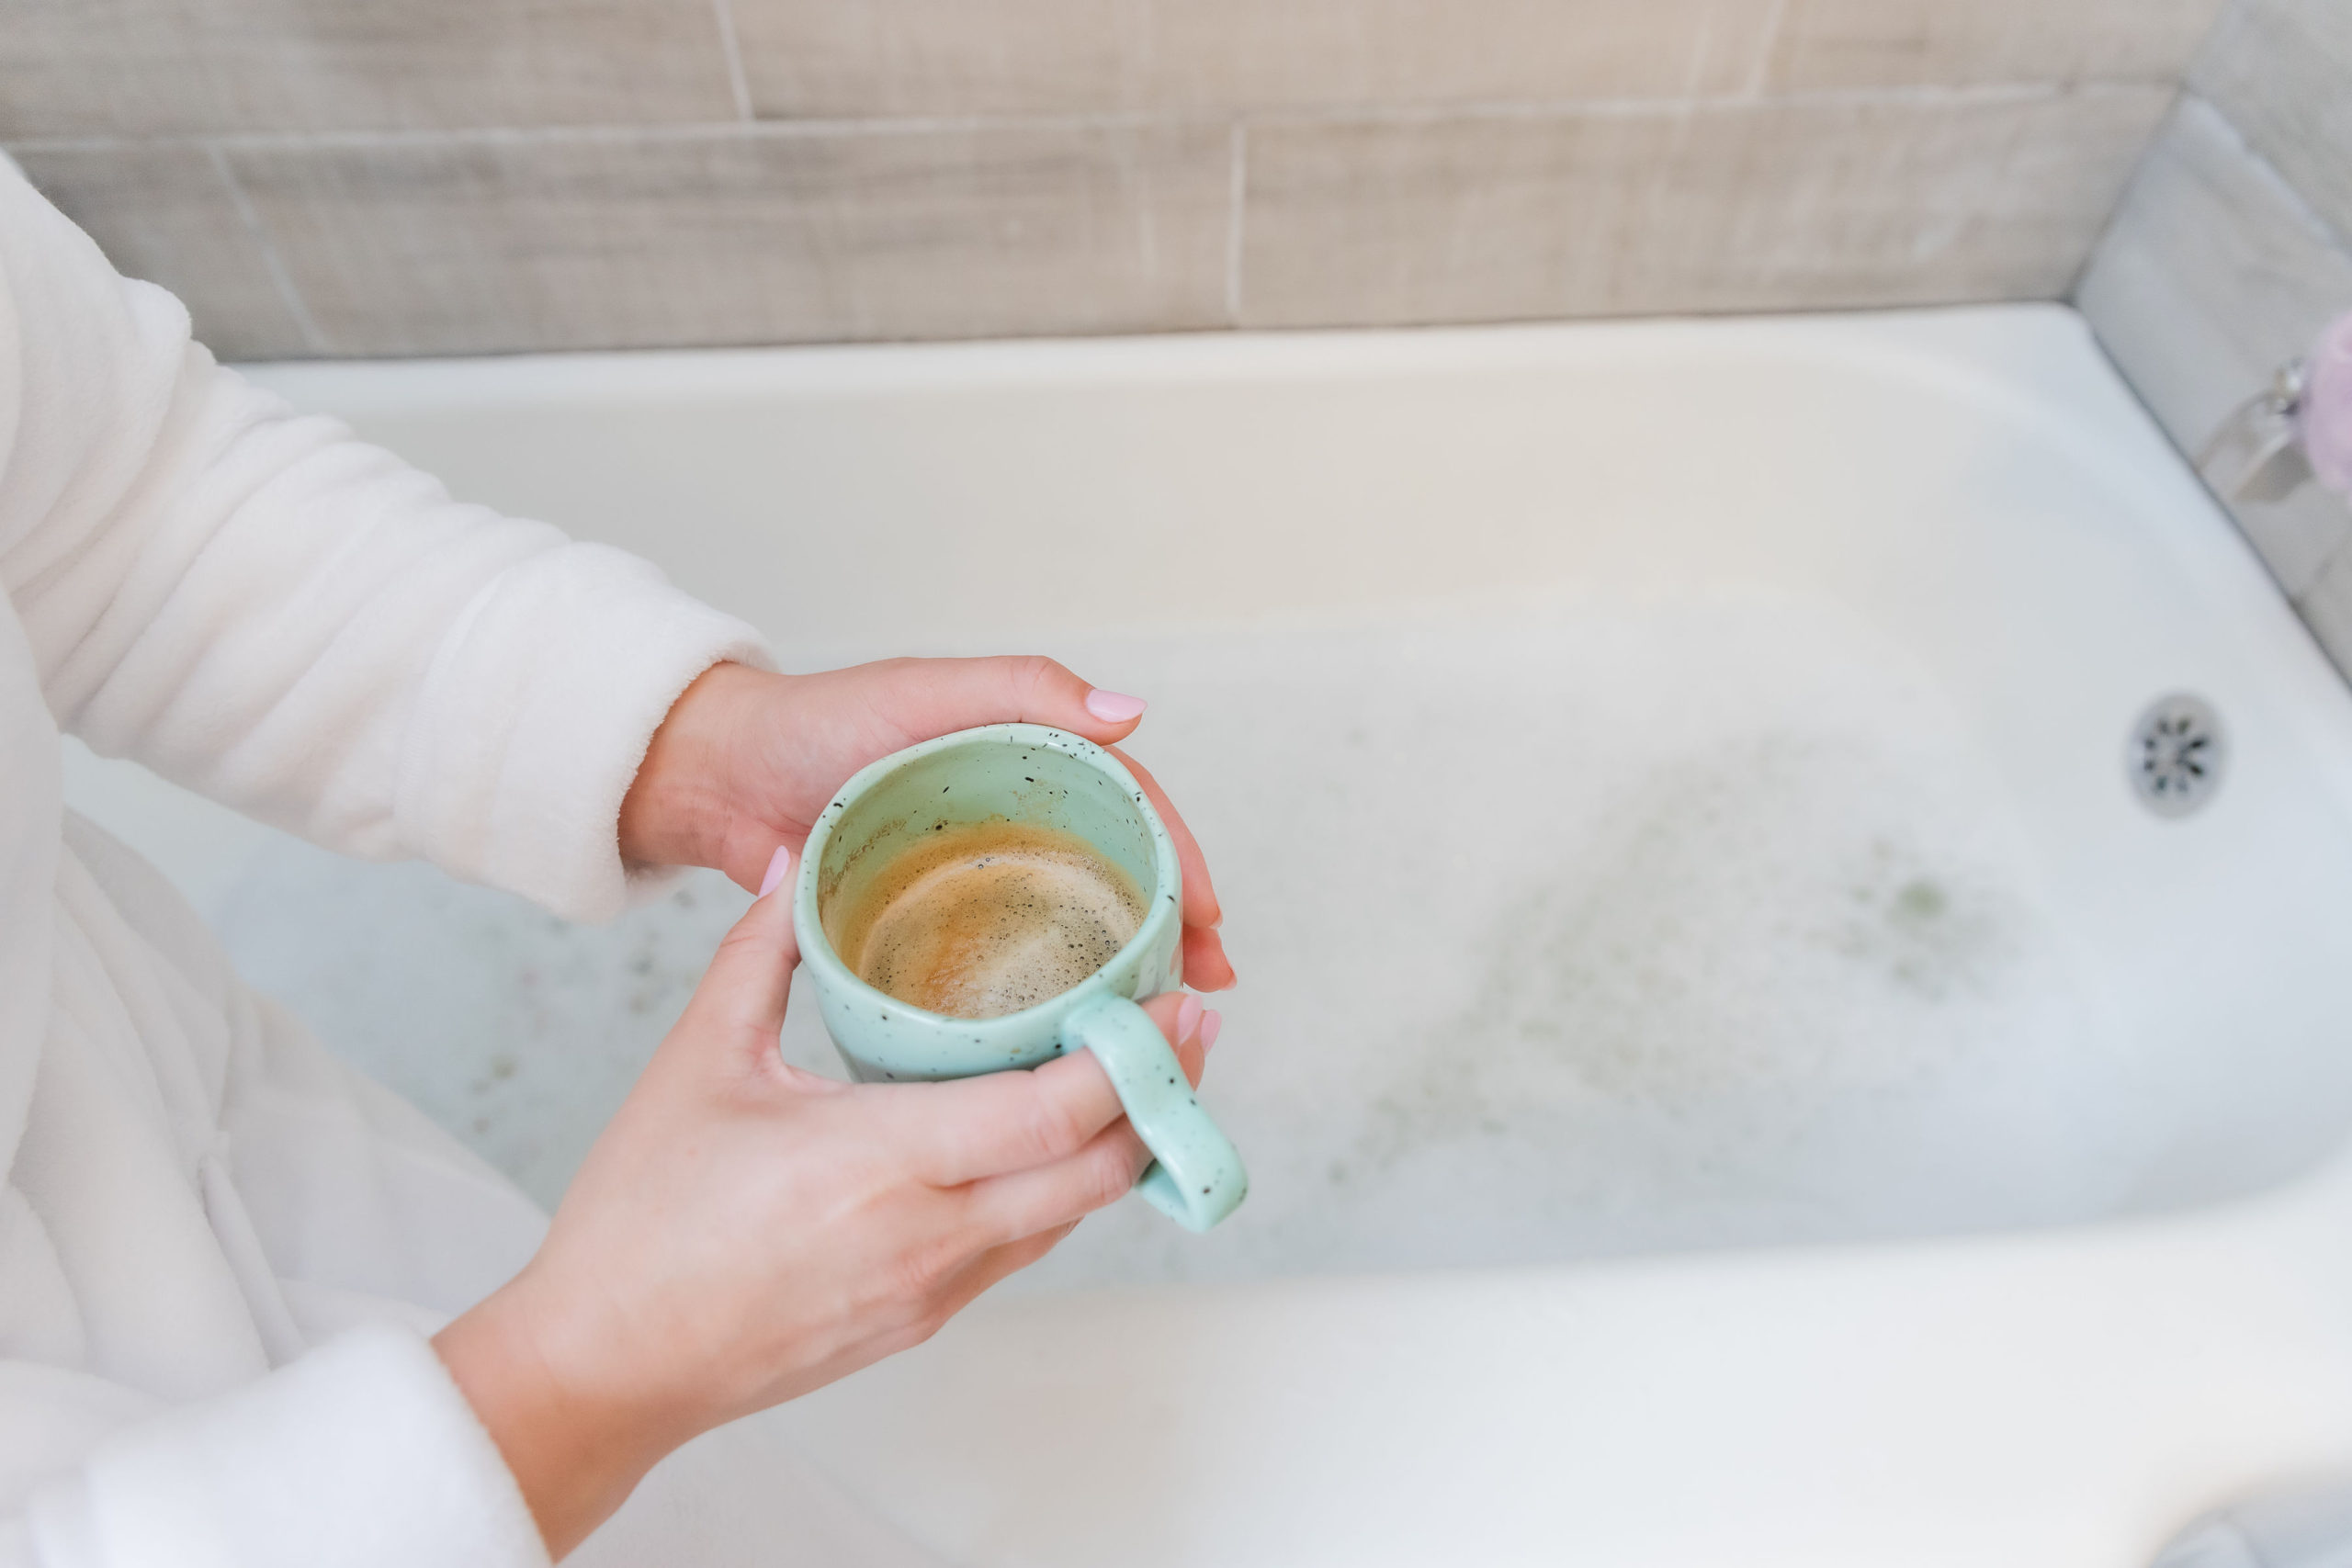 white-lady-hand-holding-a-cup-of-cofee-over-a-bath-tub-bubble-bath-setting